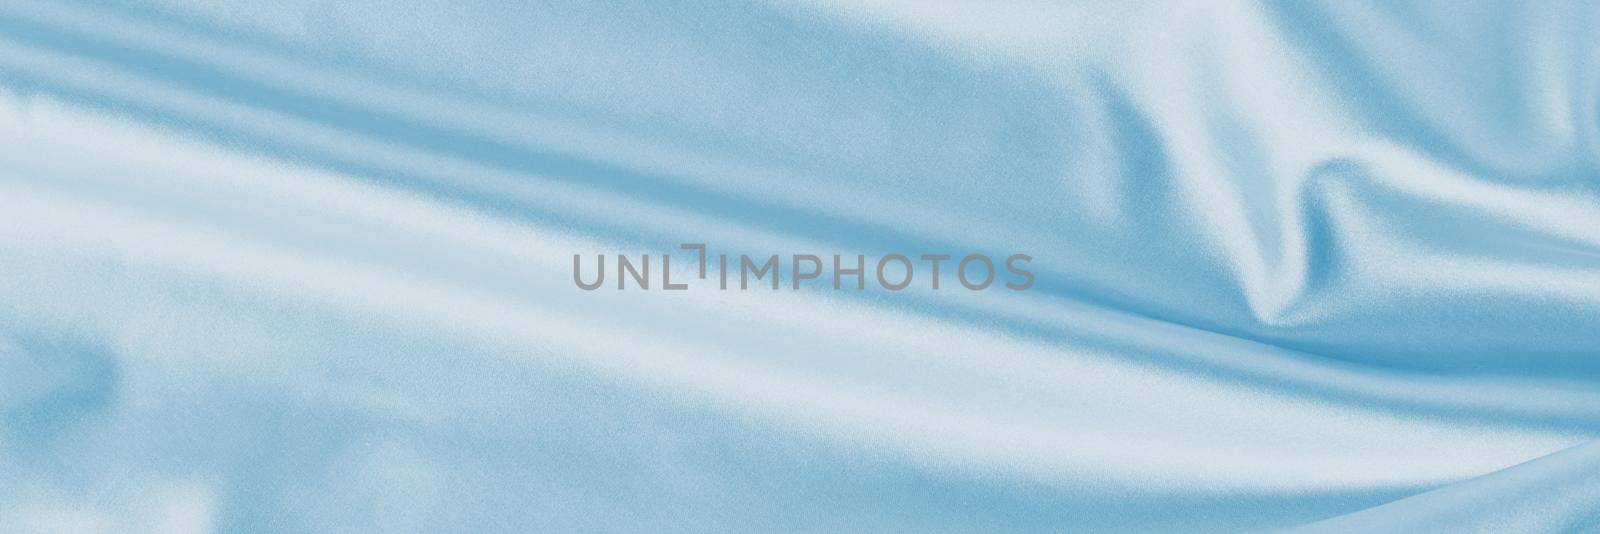 Light blue silk background with a folds. Abstract texture of rippled satin surface, long banner by Lazy_Bear